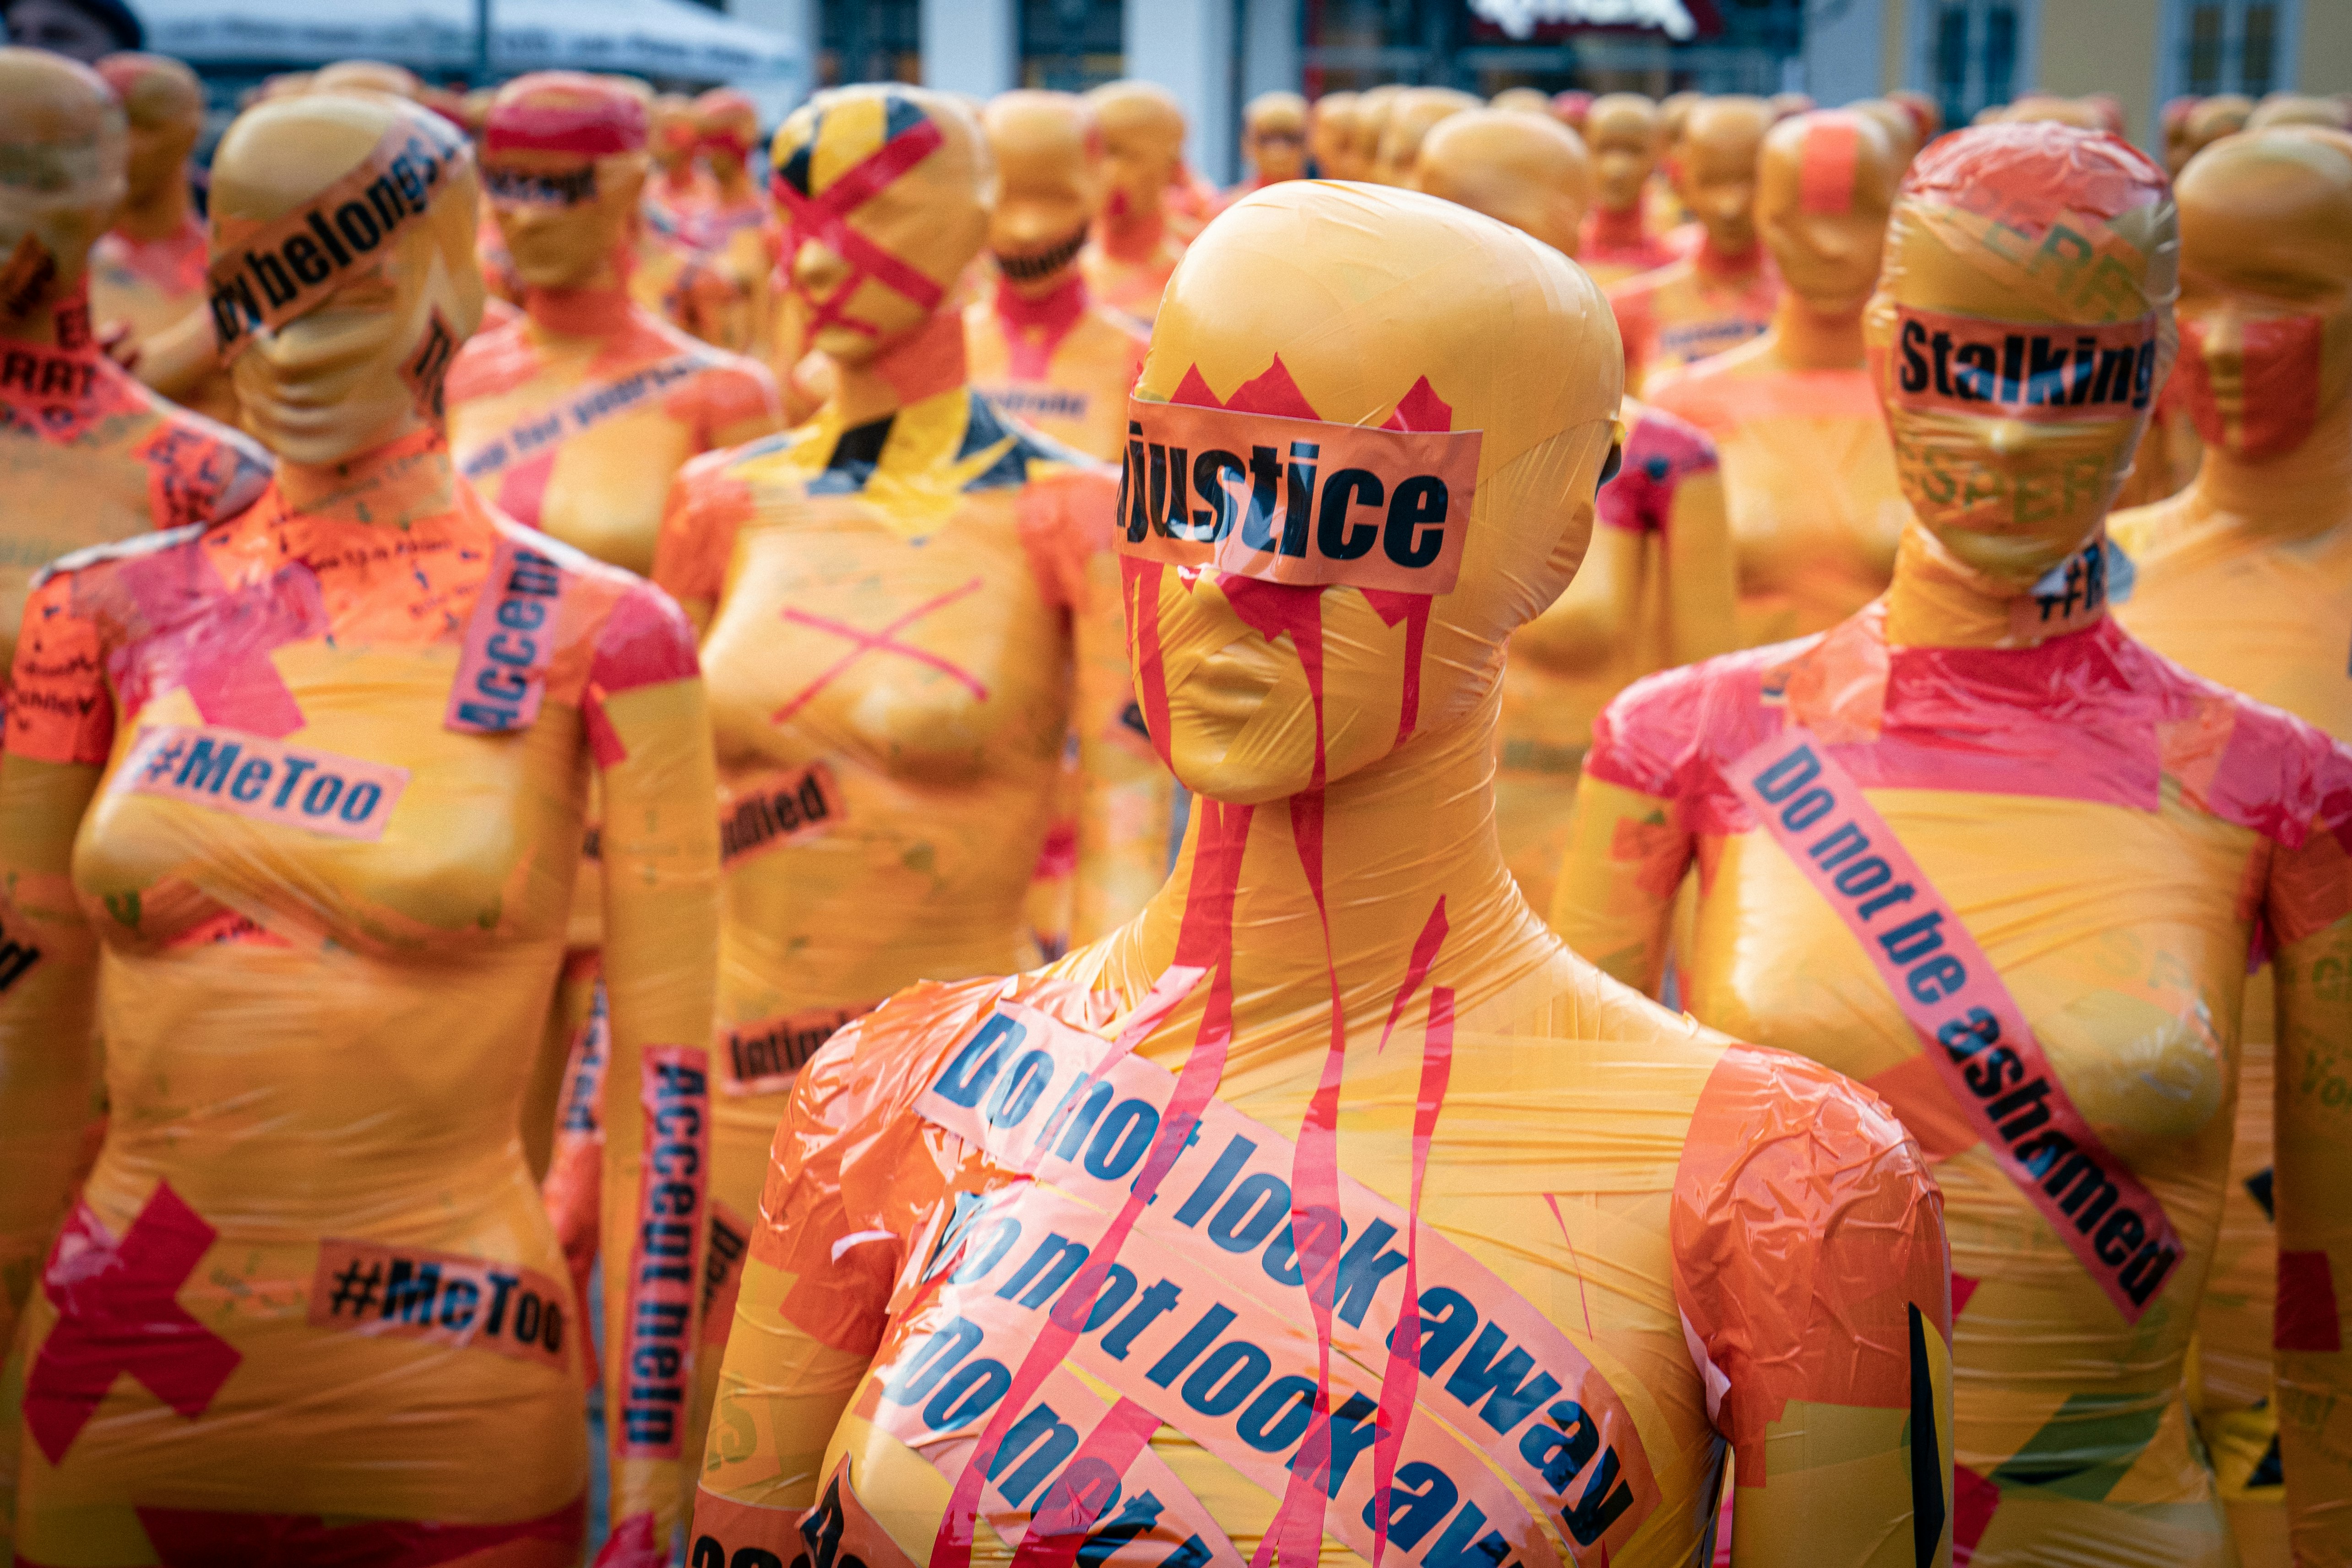 (In)Justice - November 25 is the international day against domestic violence. This photo was taken in Bonn, displaying the work of an artist.